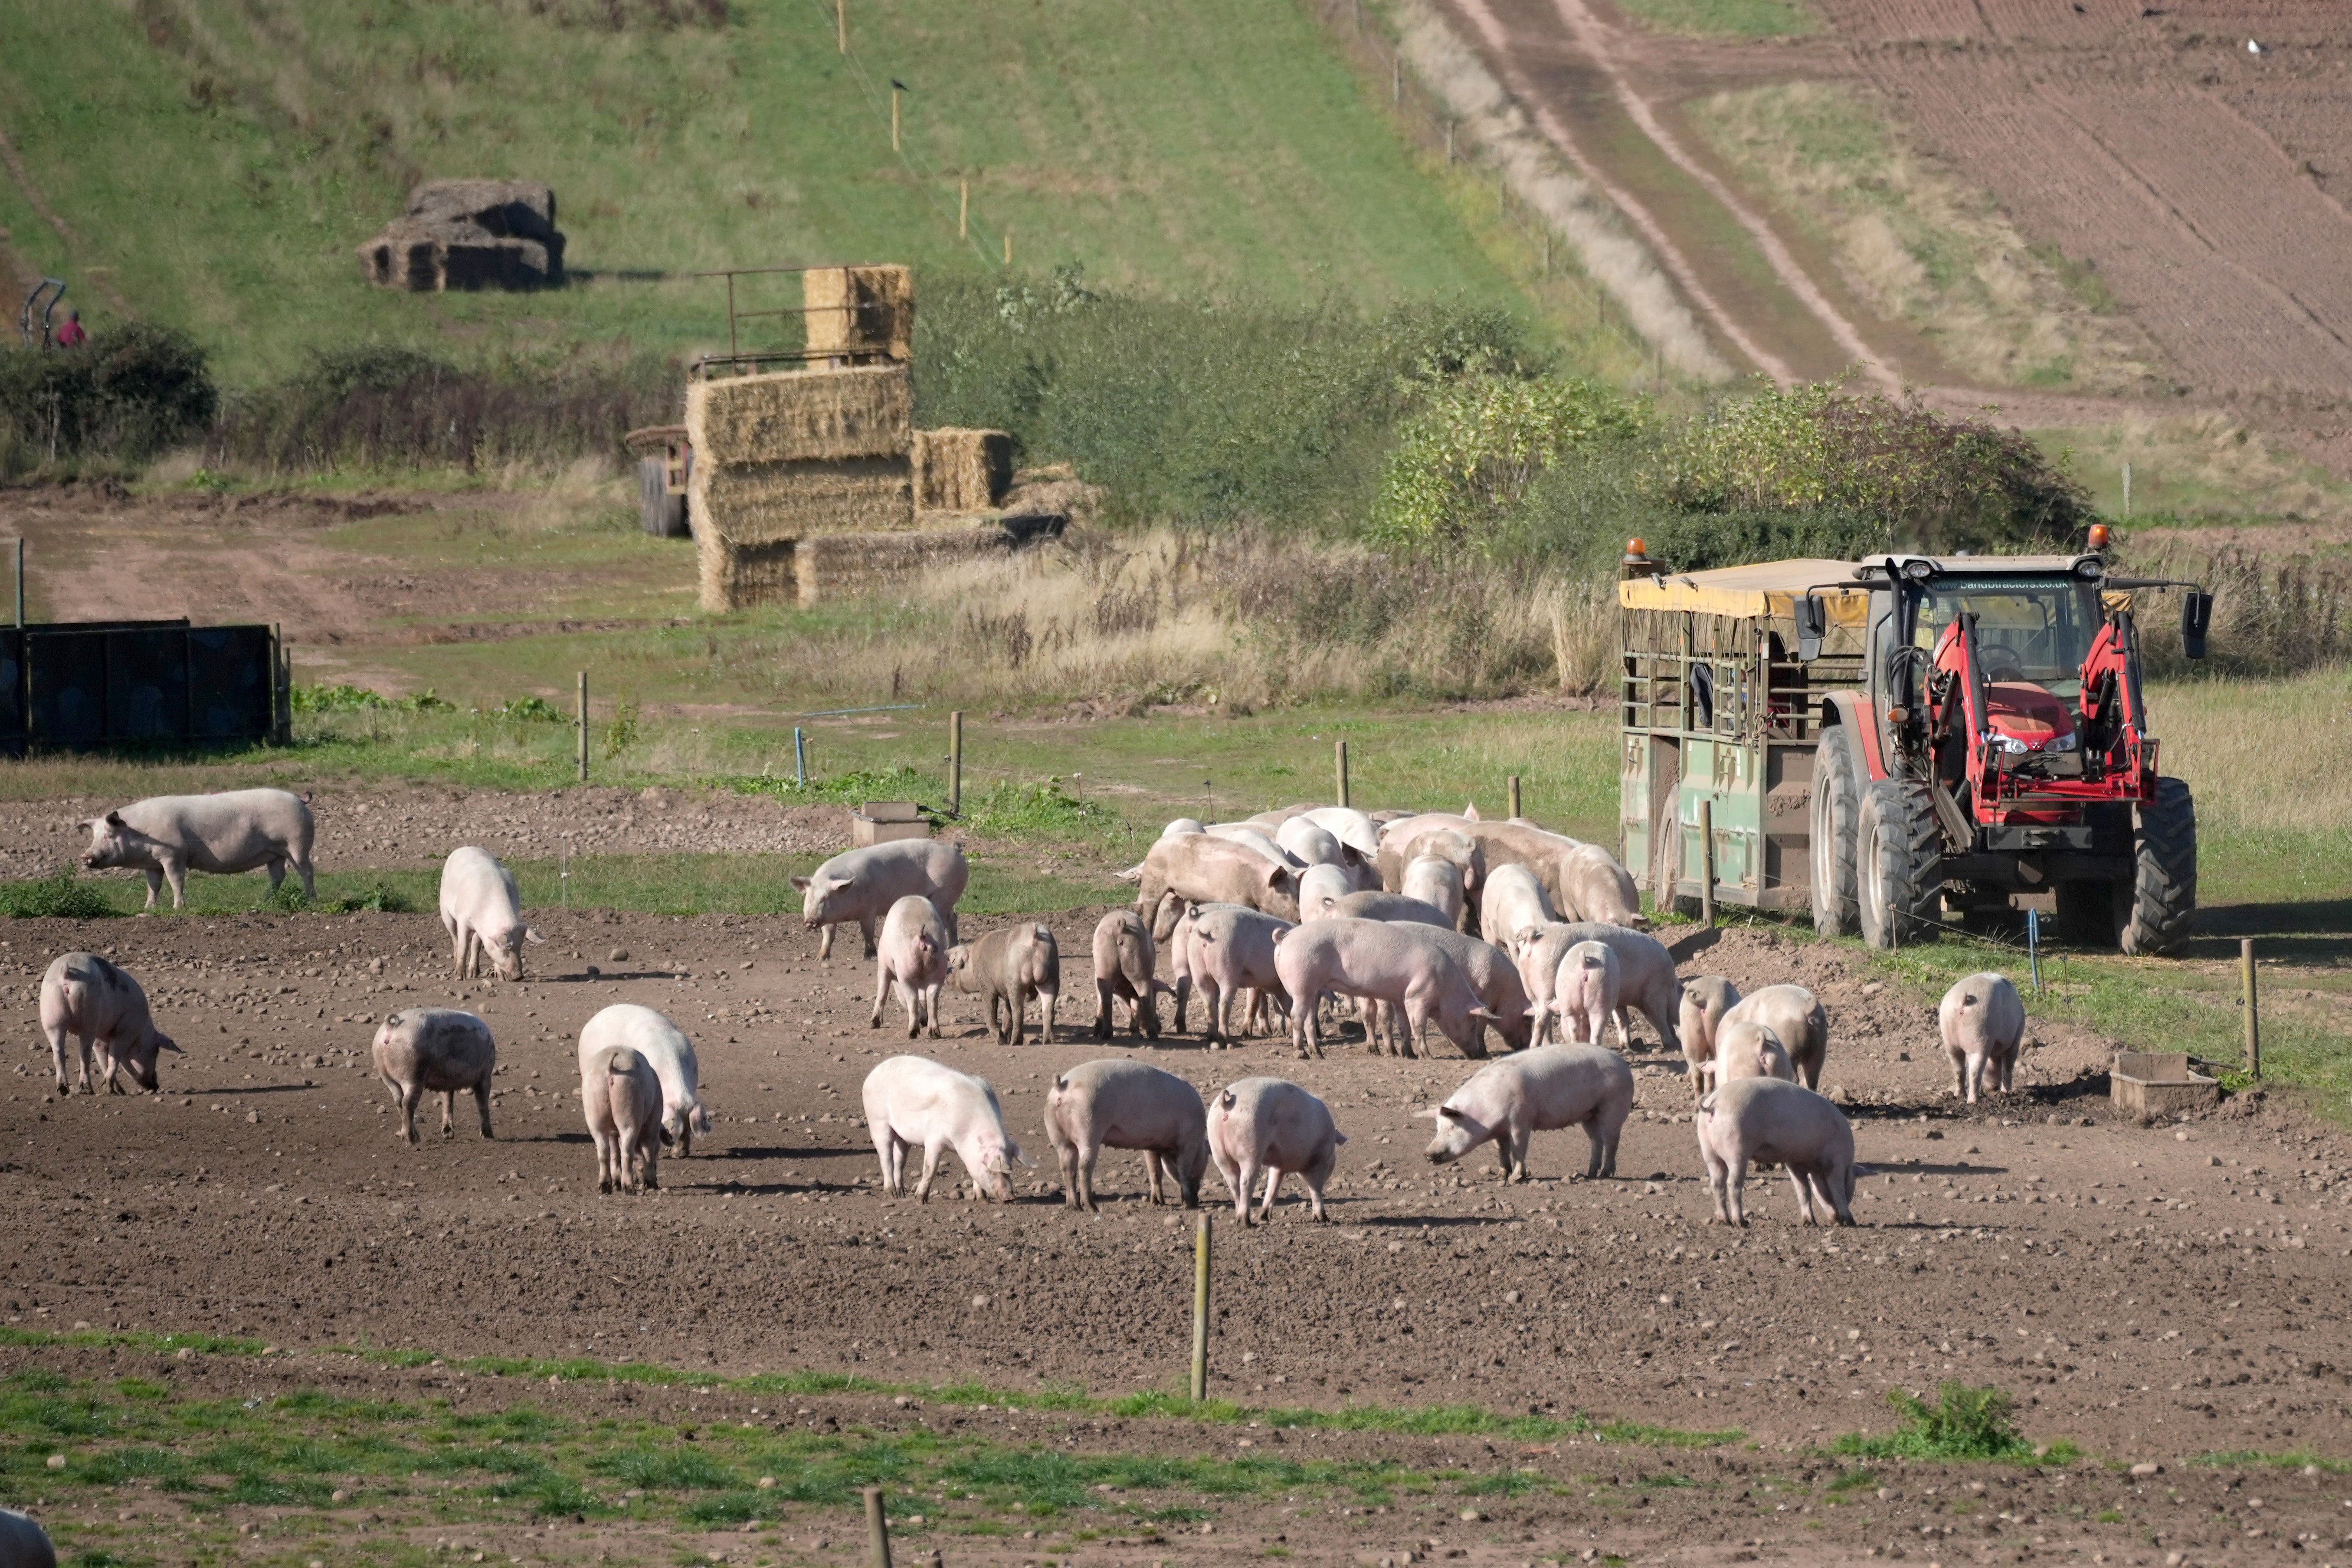 Piggies in the middle: small farms could soon be forced out of business